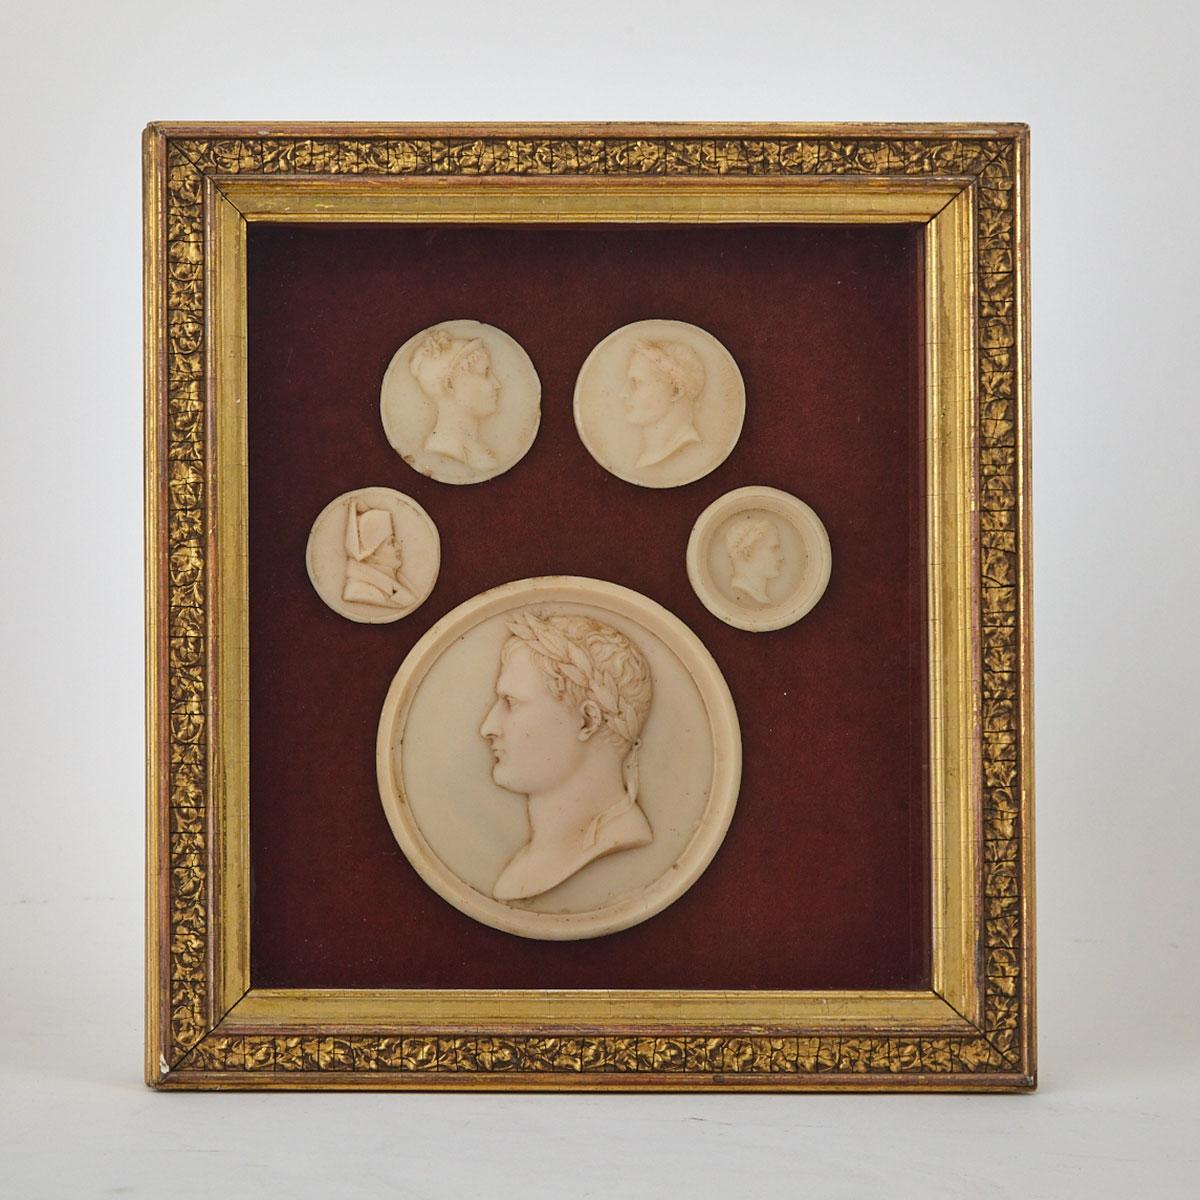 Set of Five Wax Portrait Medallions of Napoleon I and Marie-Louise of Austria, 19th century